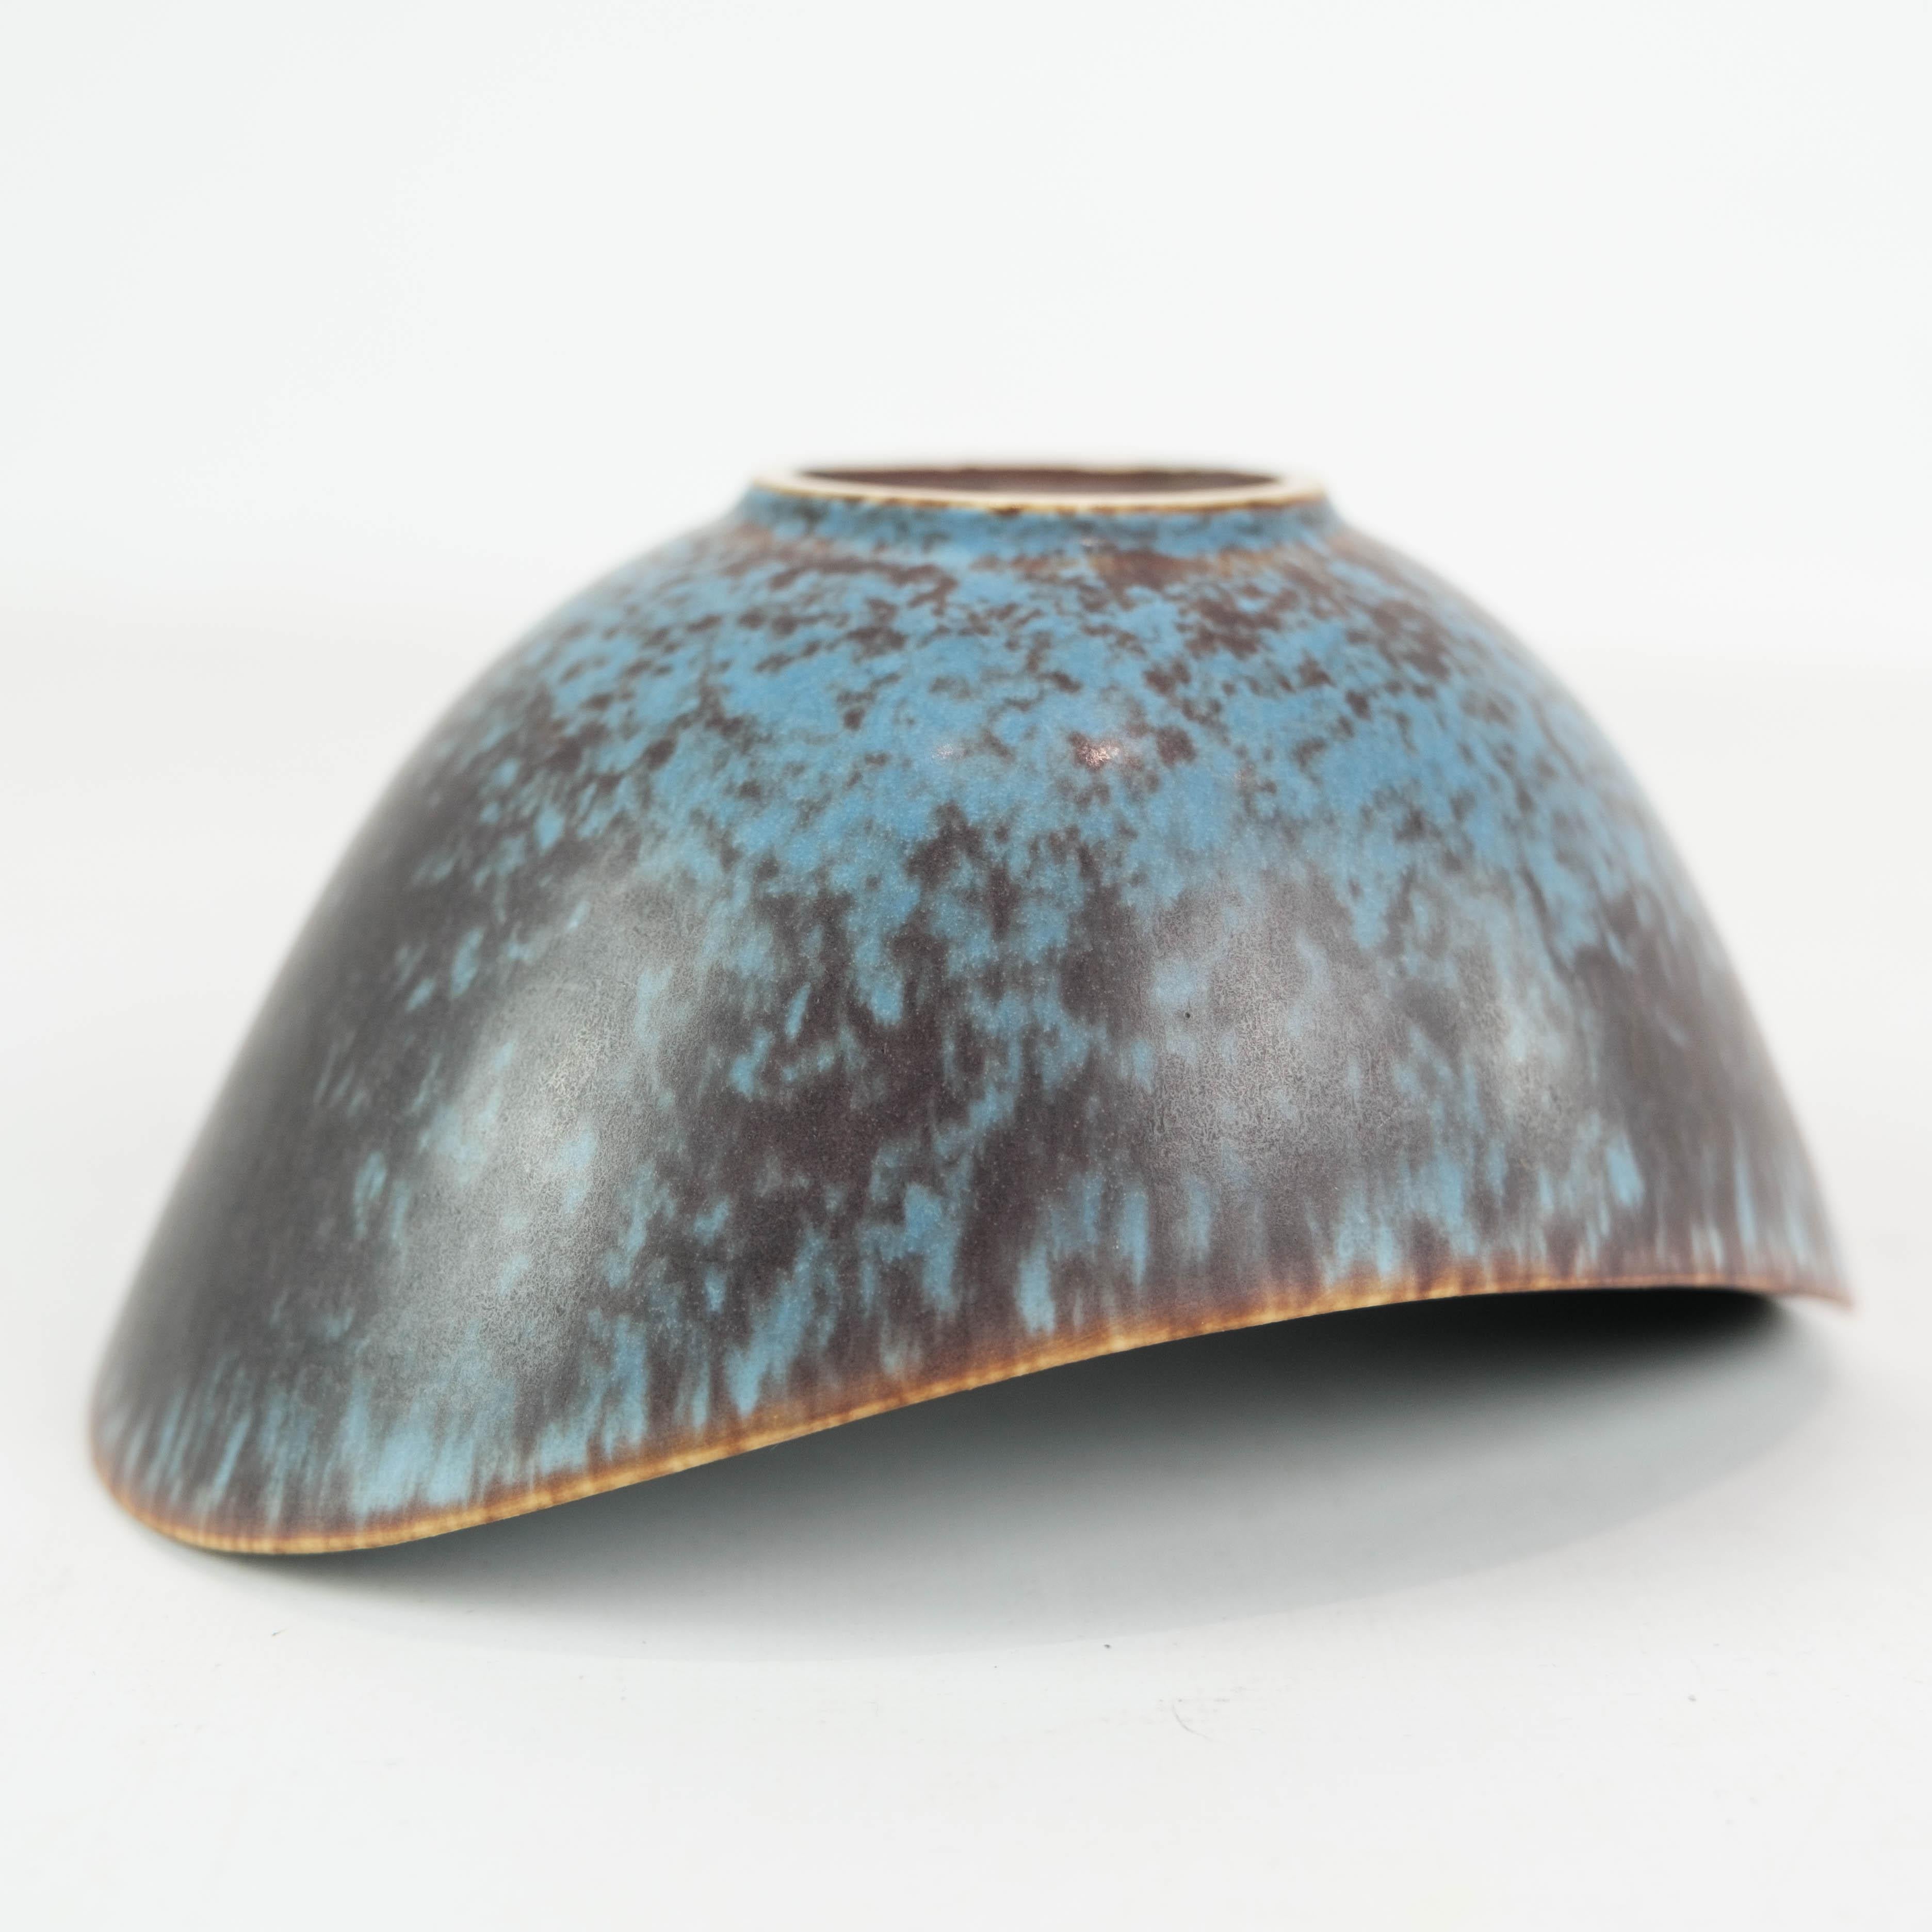 Ceramic Bowl with Blue and Brown Glace by the Artist Gunnar Nylund for Rørstrand 3